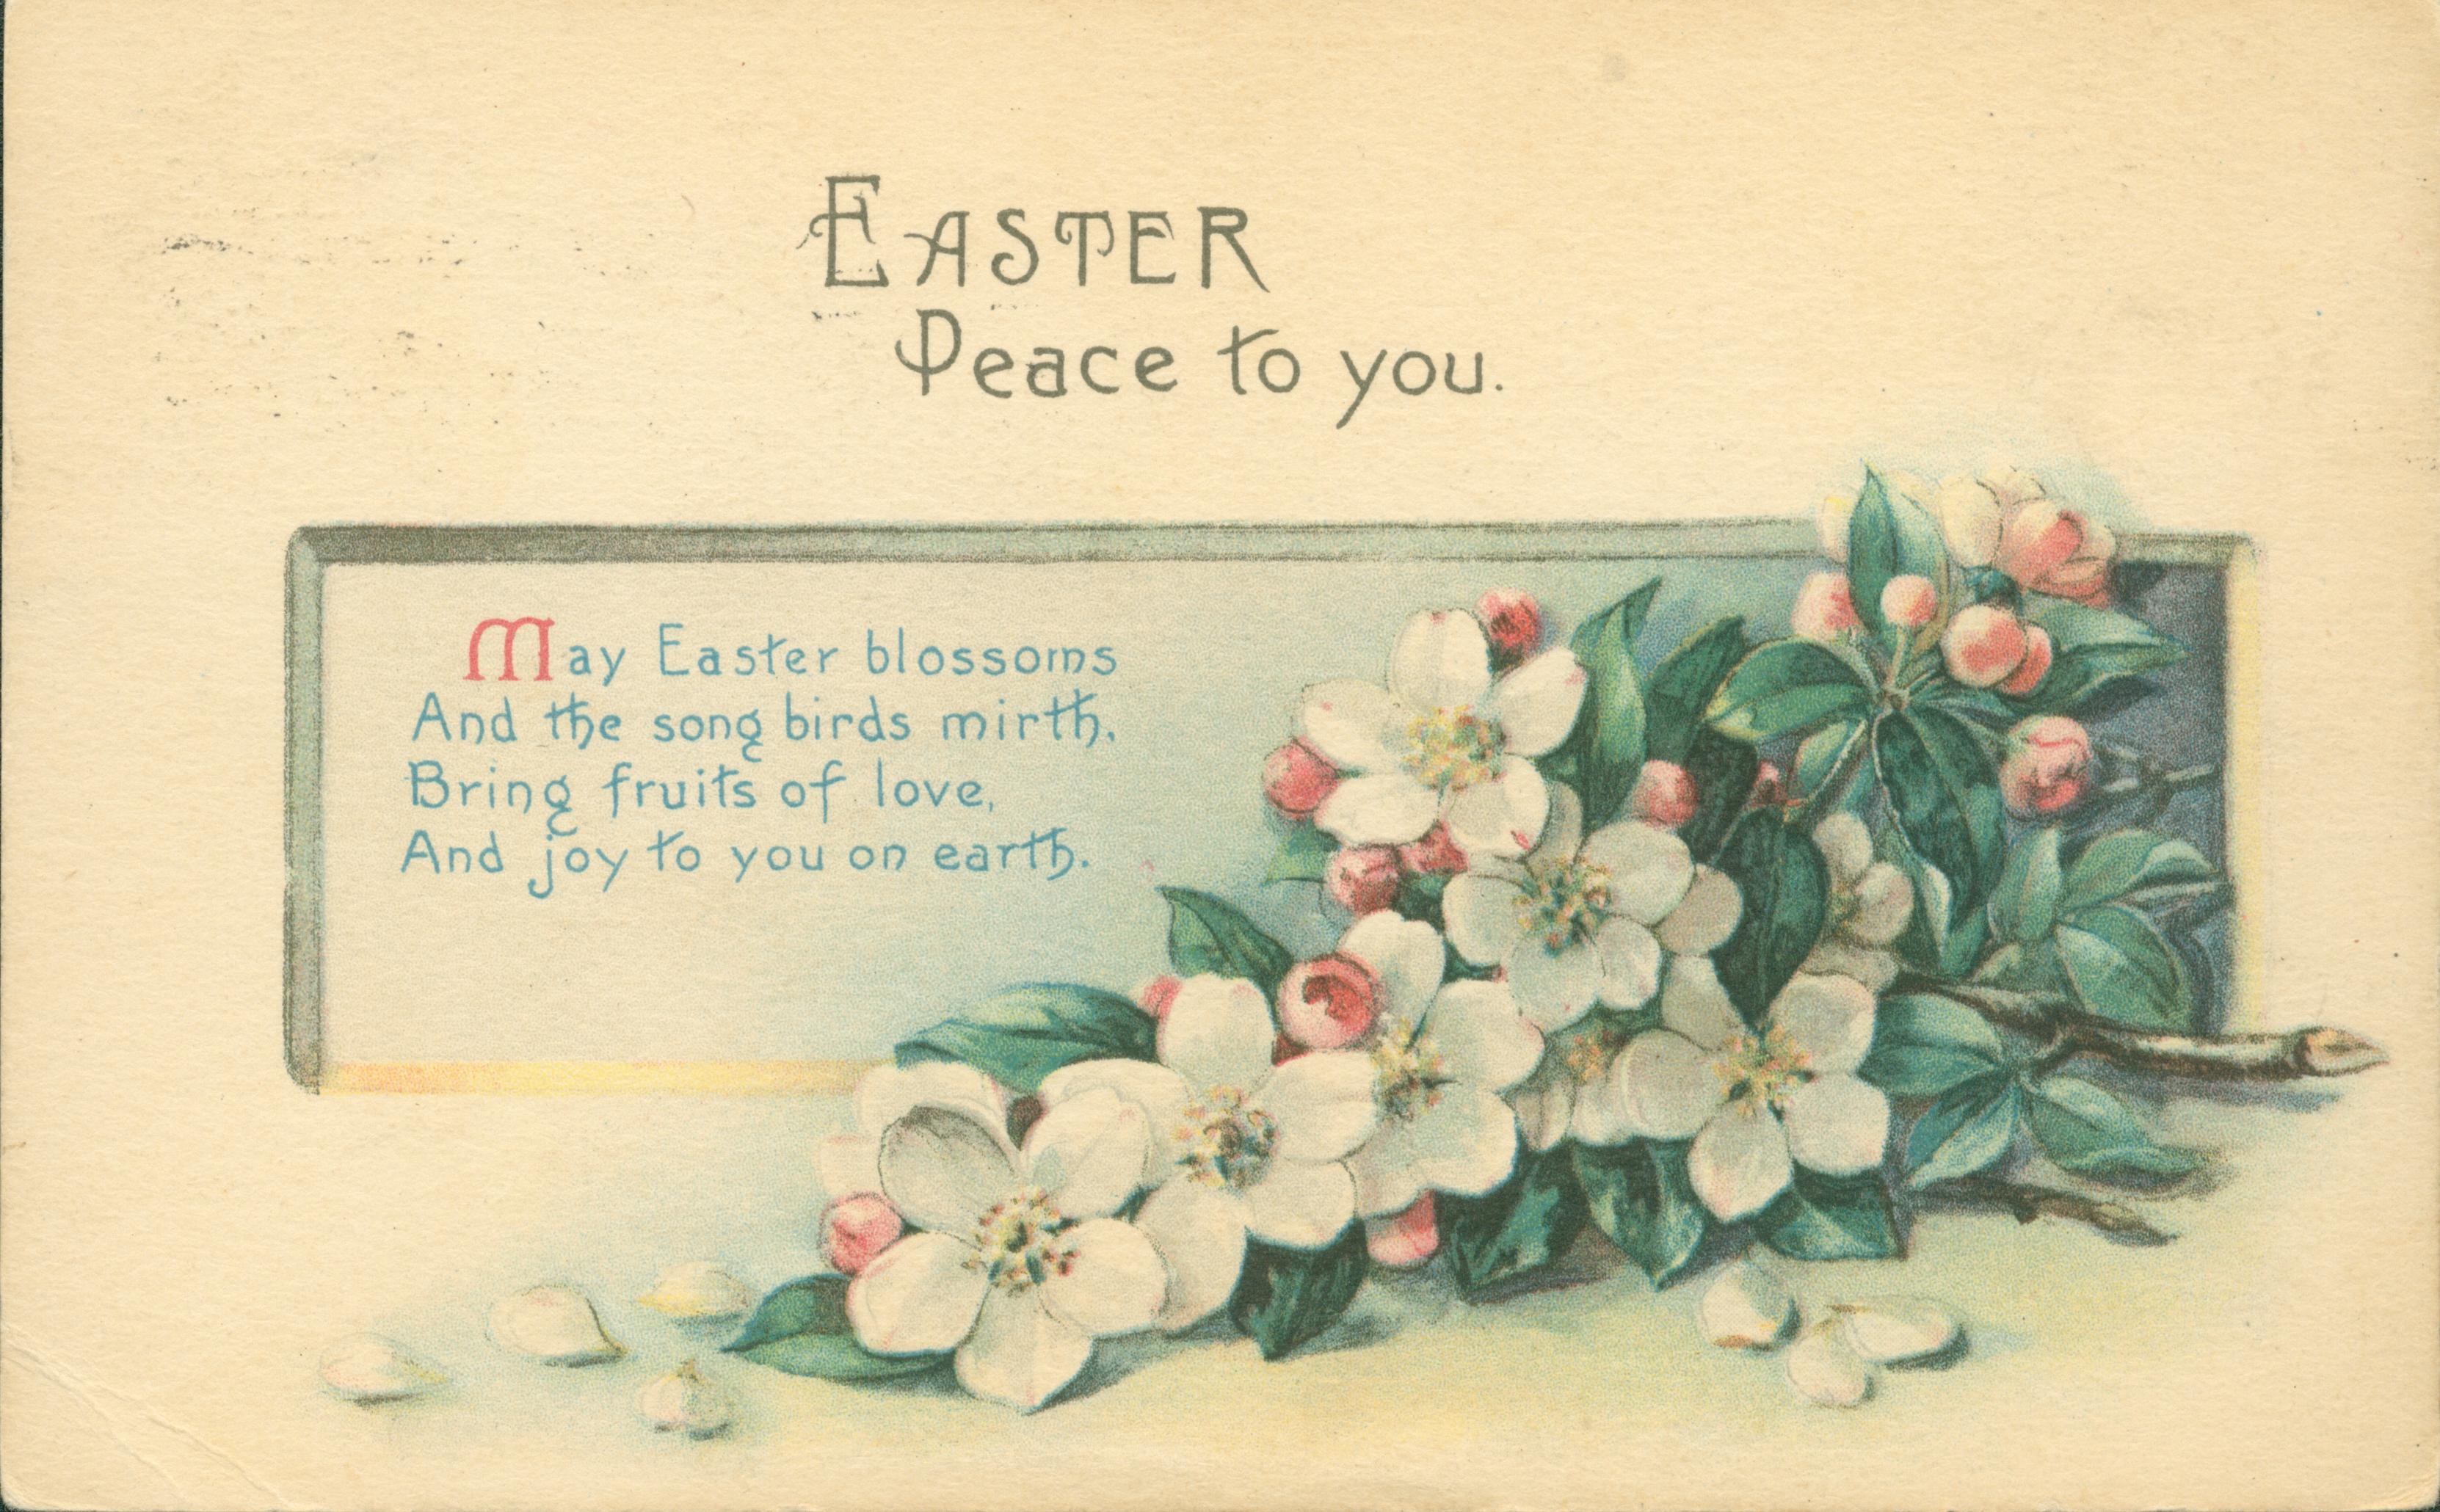 An easter poem and a bushel of flowers.